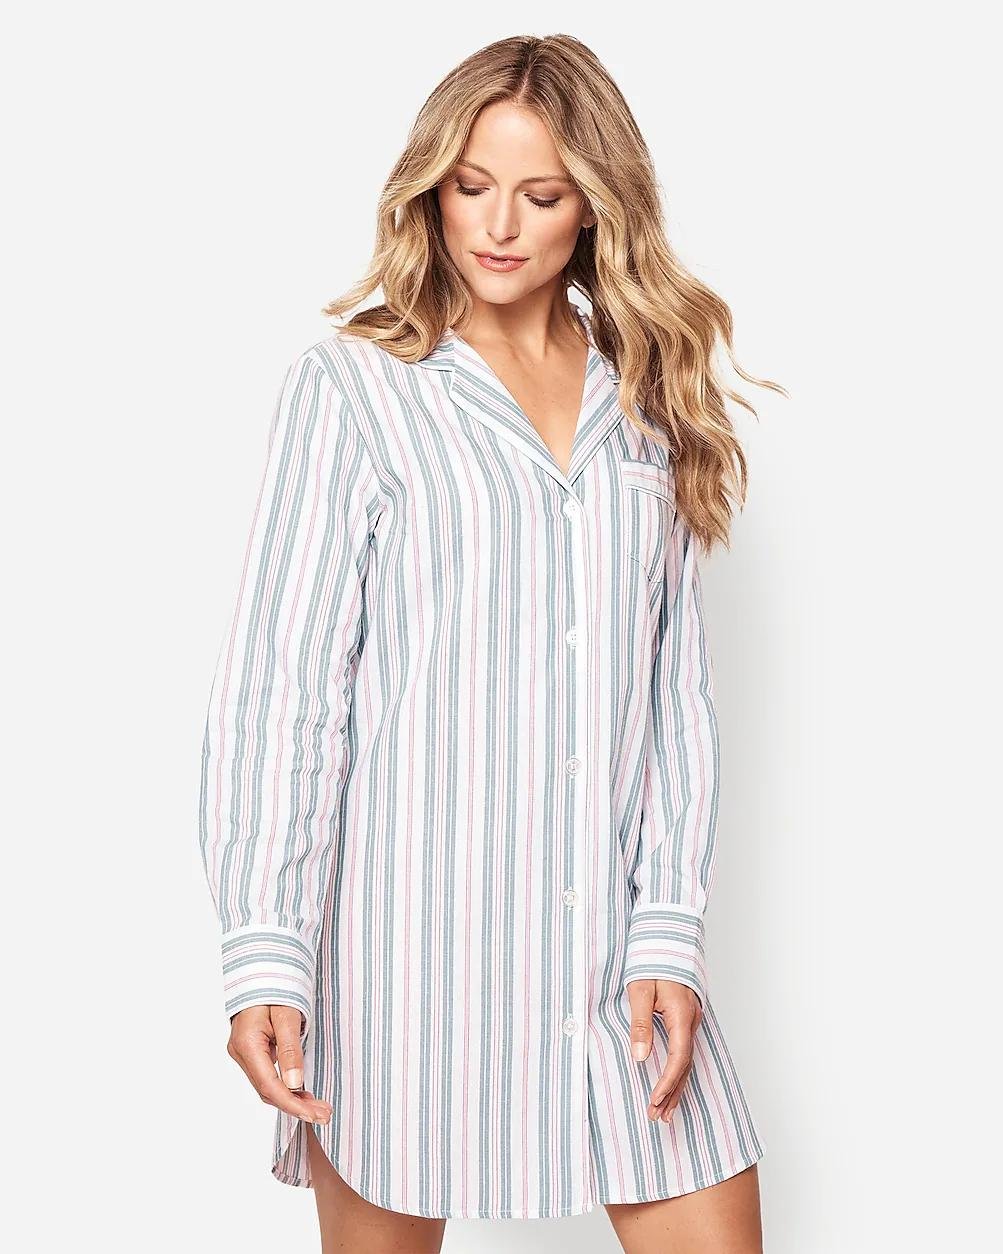 Petite Plume™ women's nightshirt in vintage french stripe by J.CREW